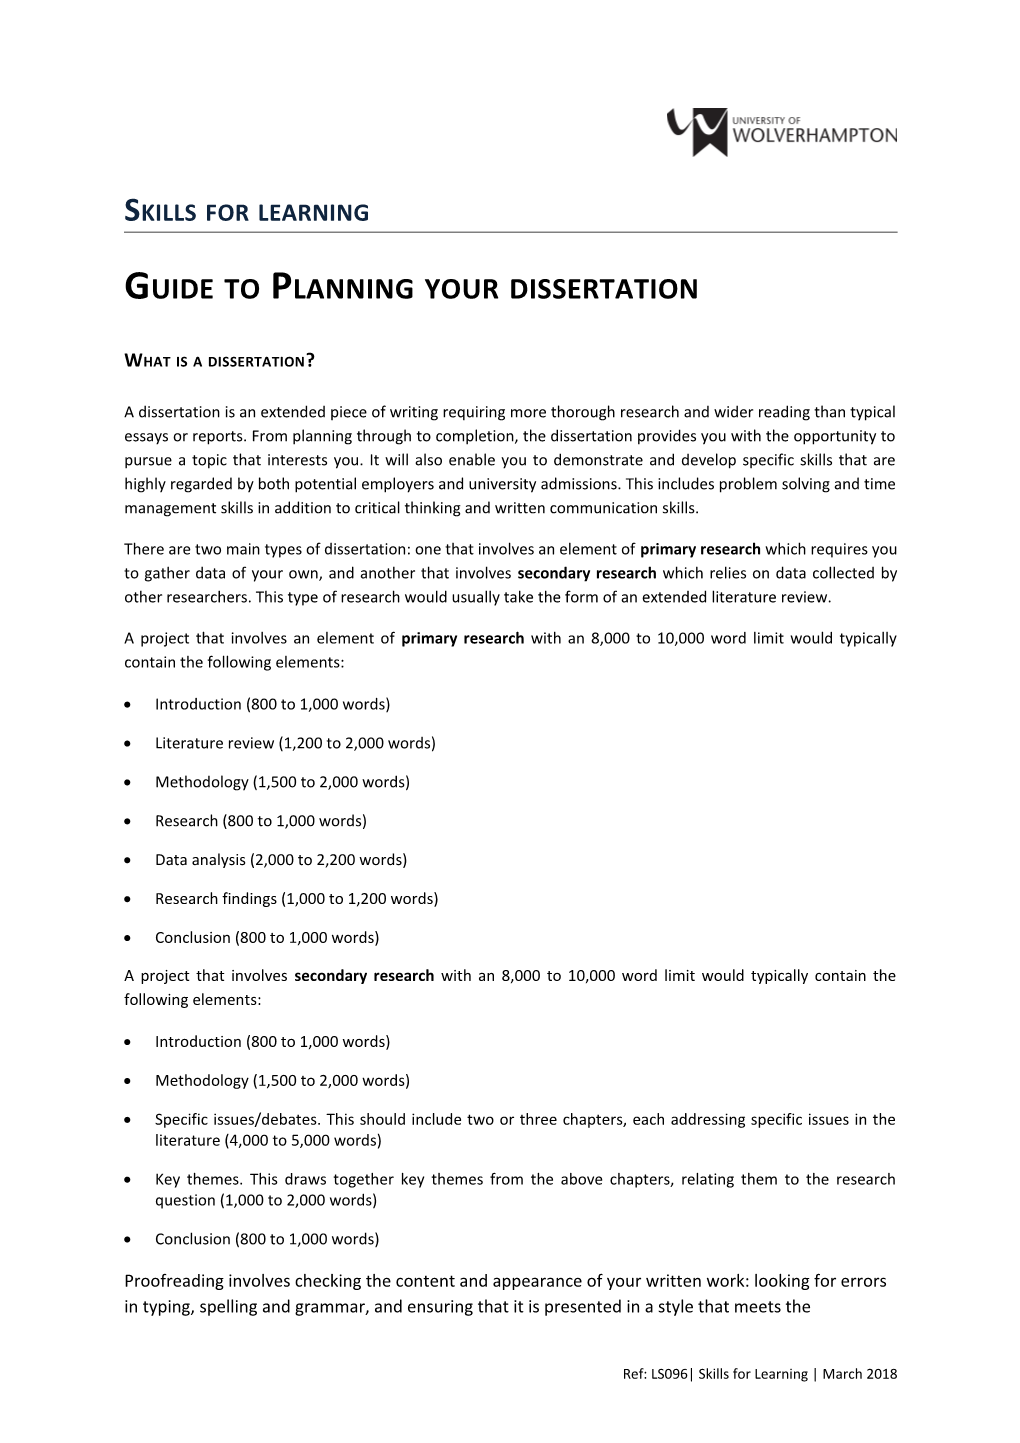 Guide to Planning Your Dissertation